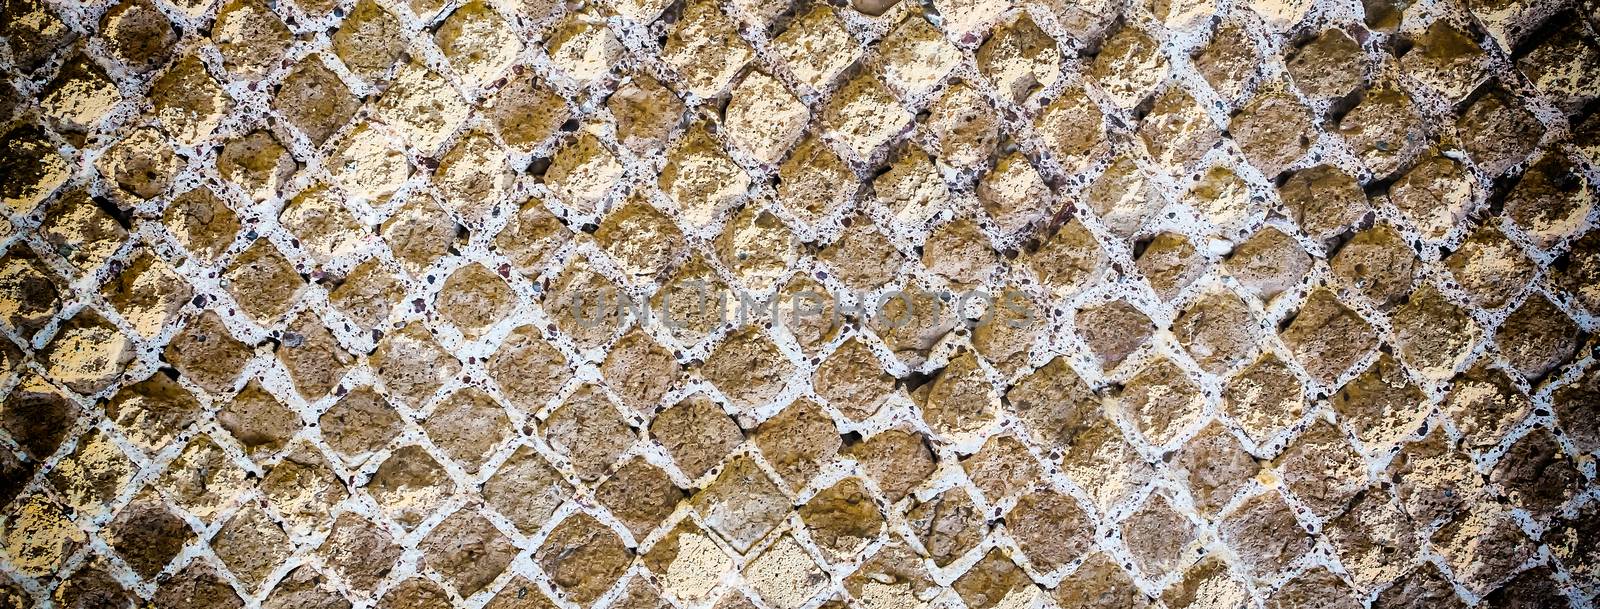 Stone Brick Wall Texture with Vignette Effect, may use as backgr by marcorubino